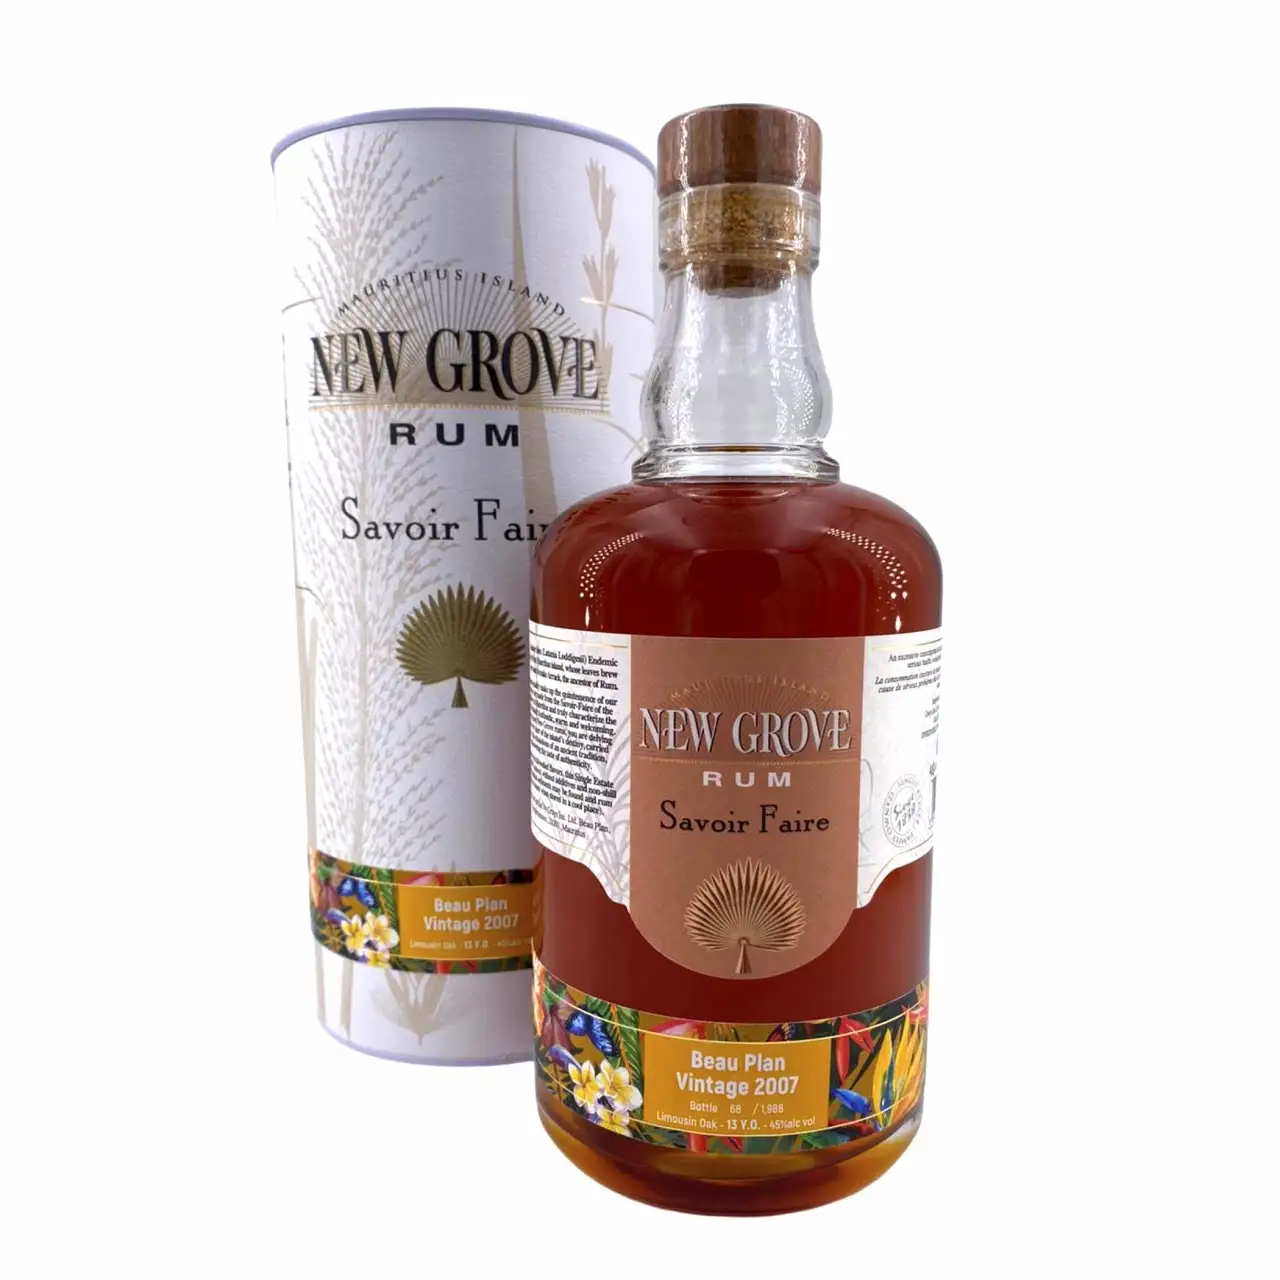 Image of the front of the bottle of the rum New Grove Savoir-Faire Beau Plan